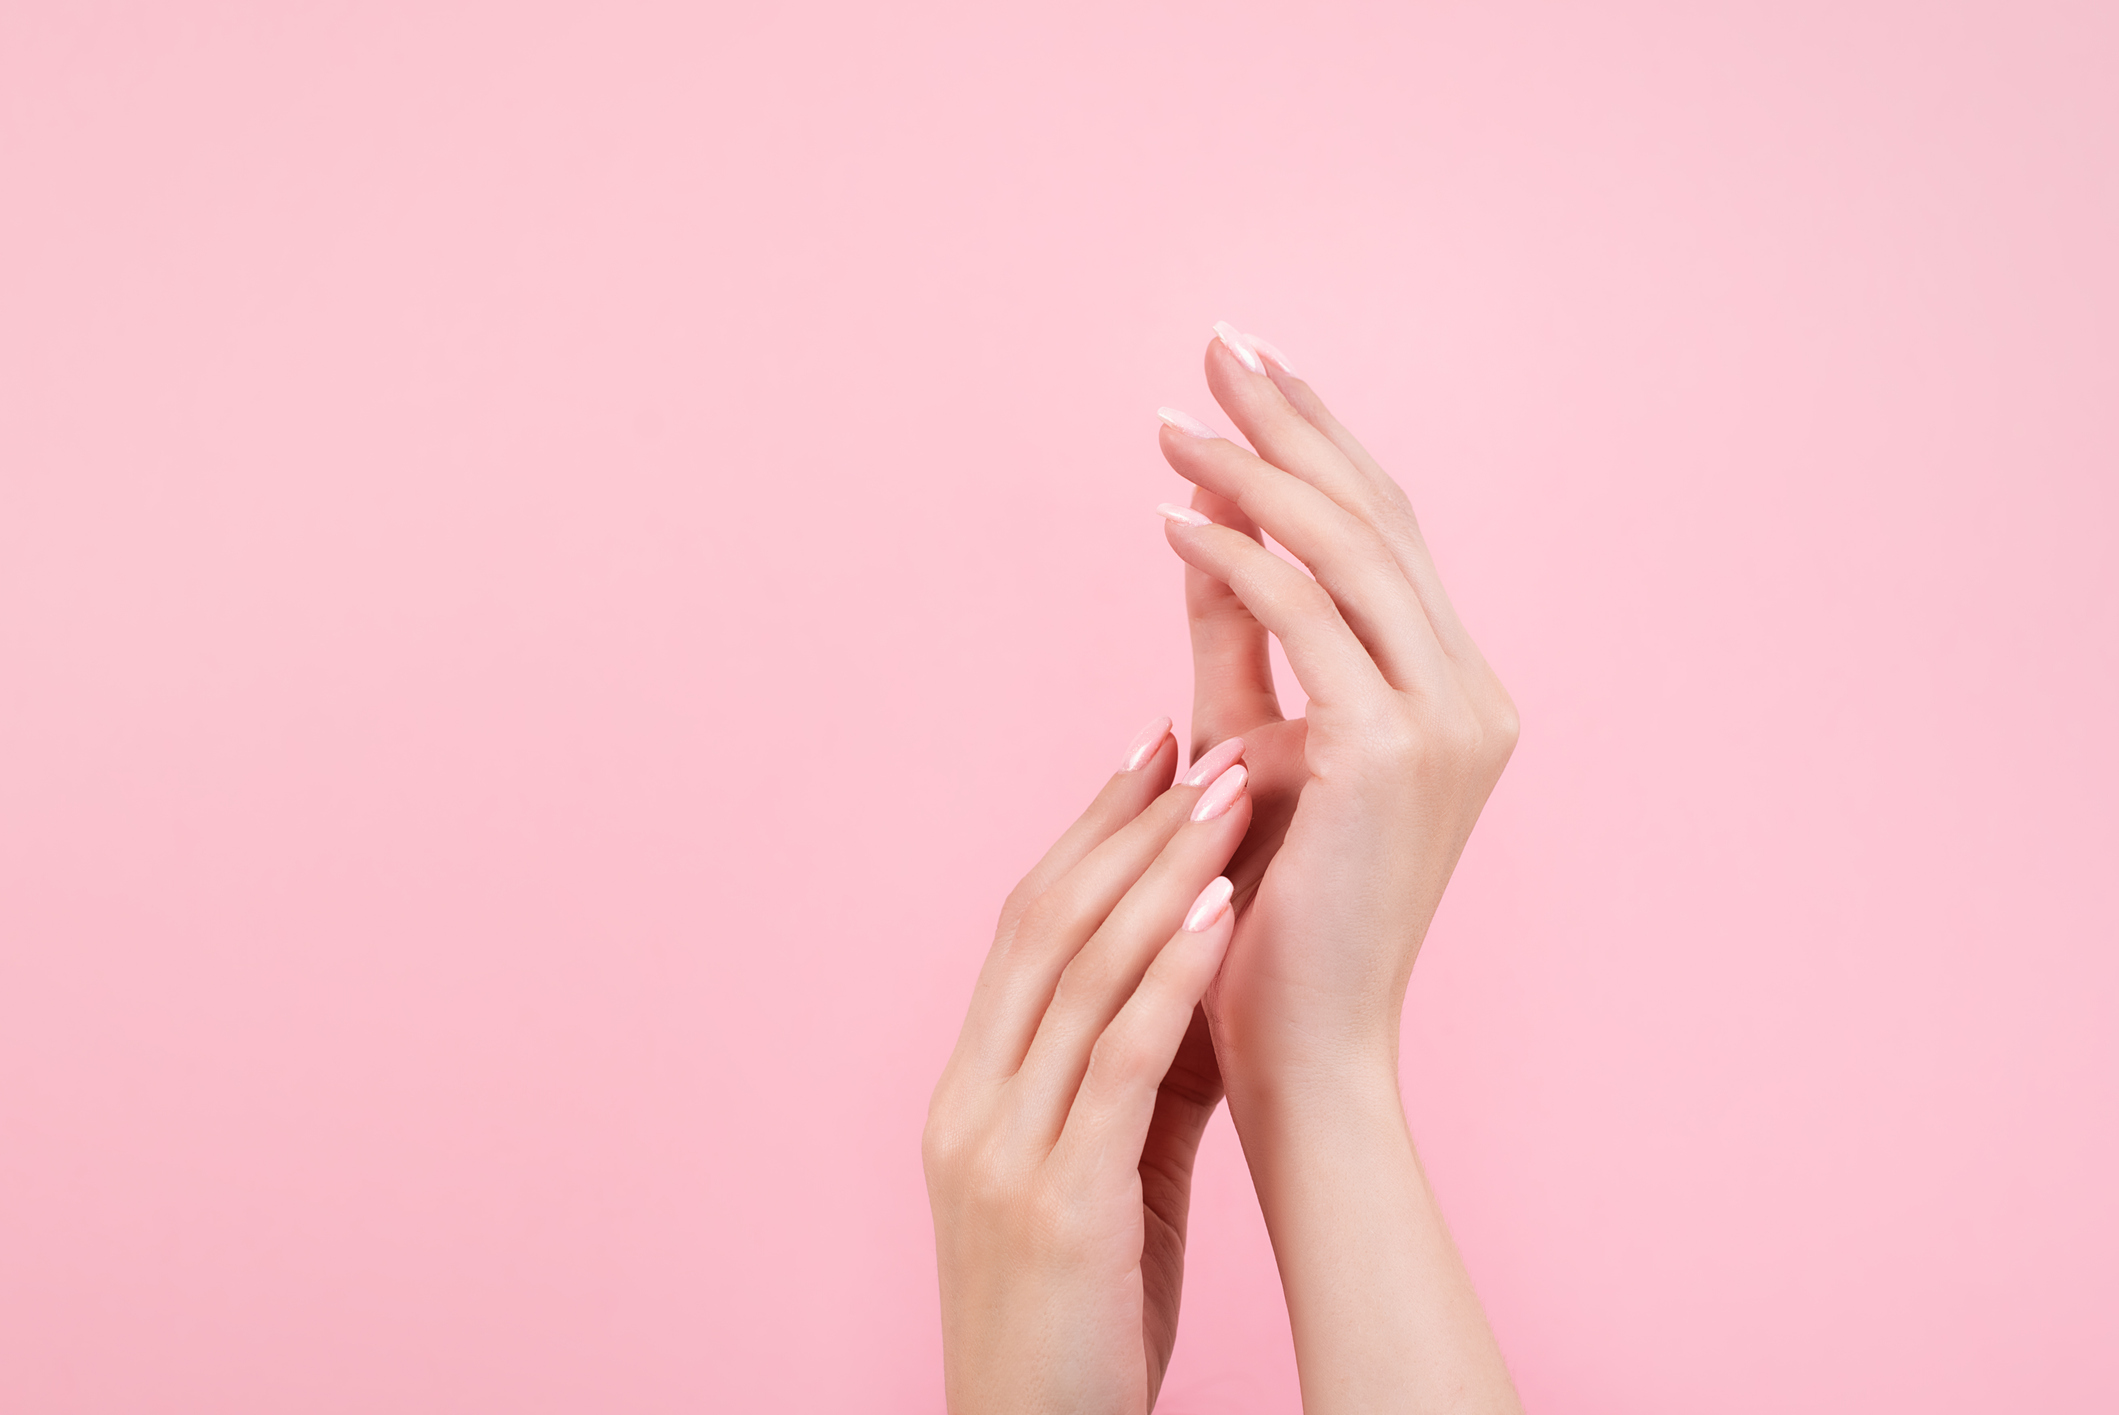 Tender Hands With Perfect Blue And Pink Manicure On Trendy Pastel Pink Background. Place For Text.